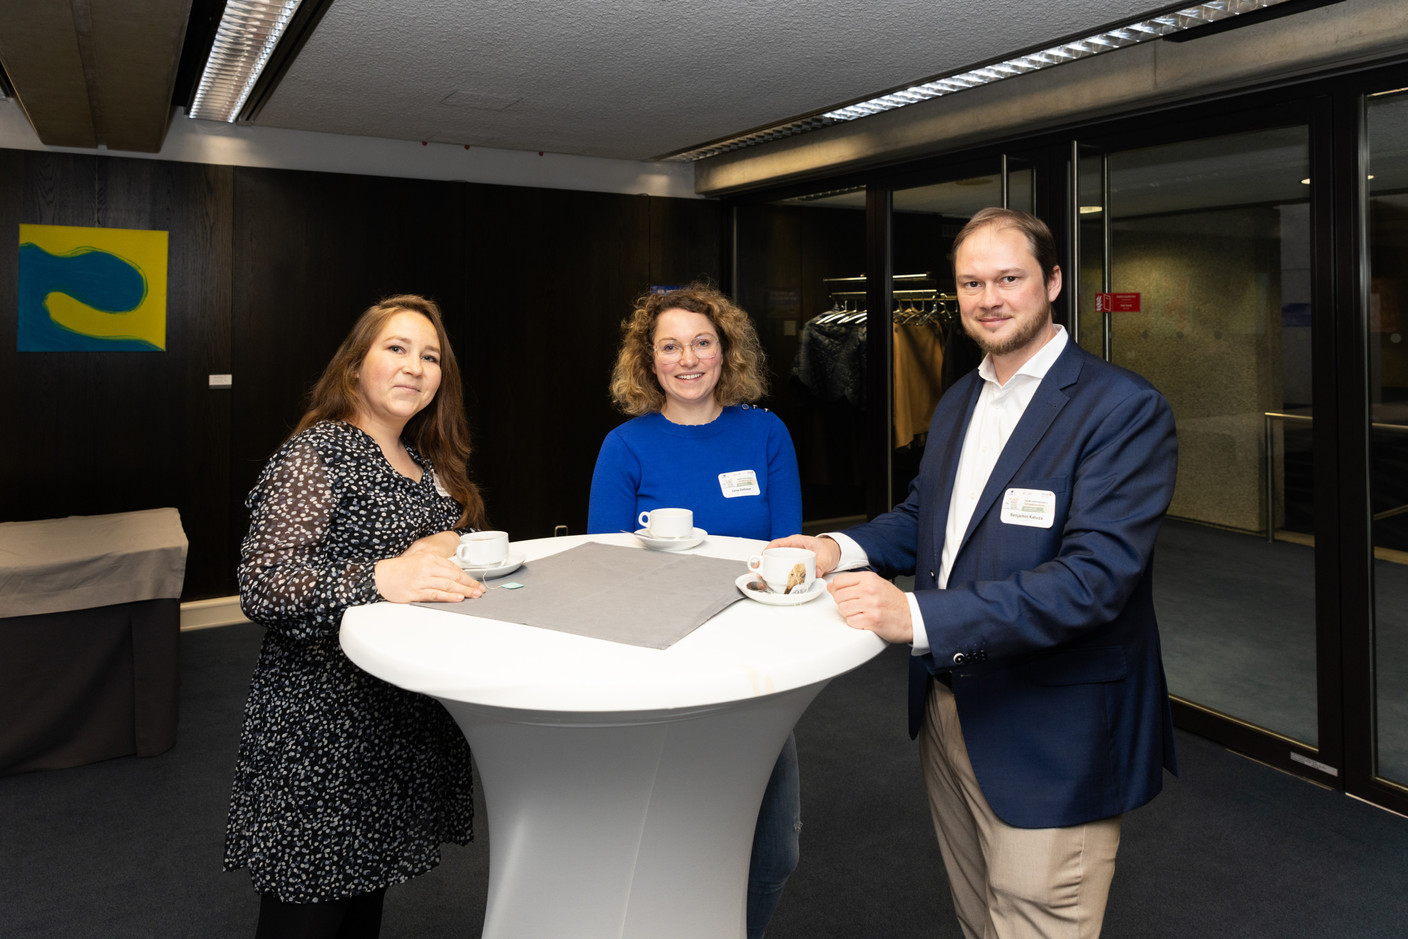 Lena Ziehmer (centre) and Benjamin Kaluza (right), during the networking event at the ‘community disaster preparedness’ conference at EIB headquarters in Luxembourg on 26 October 2023. Photo: Romain Gamba / Maison Moderne